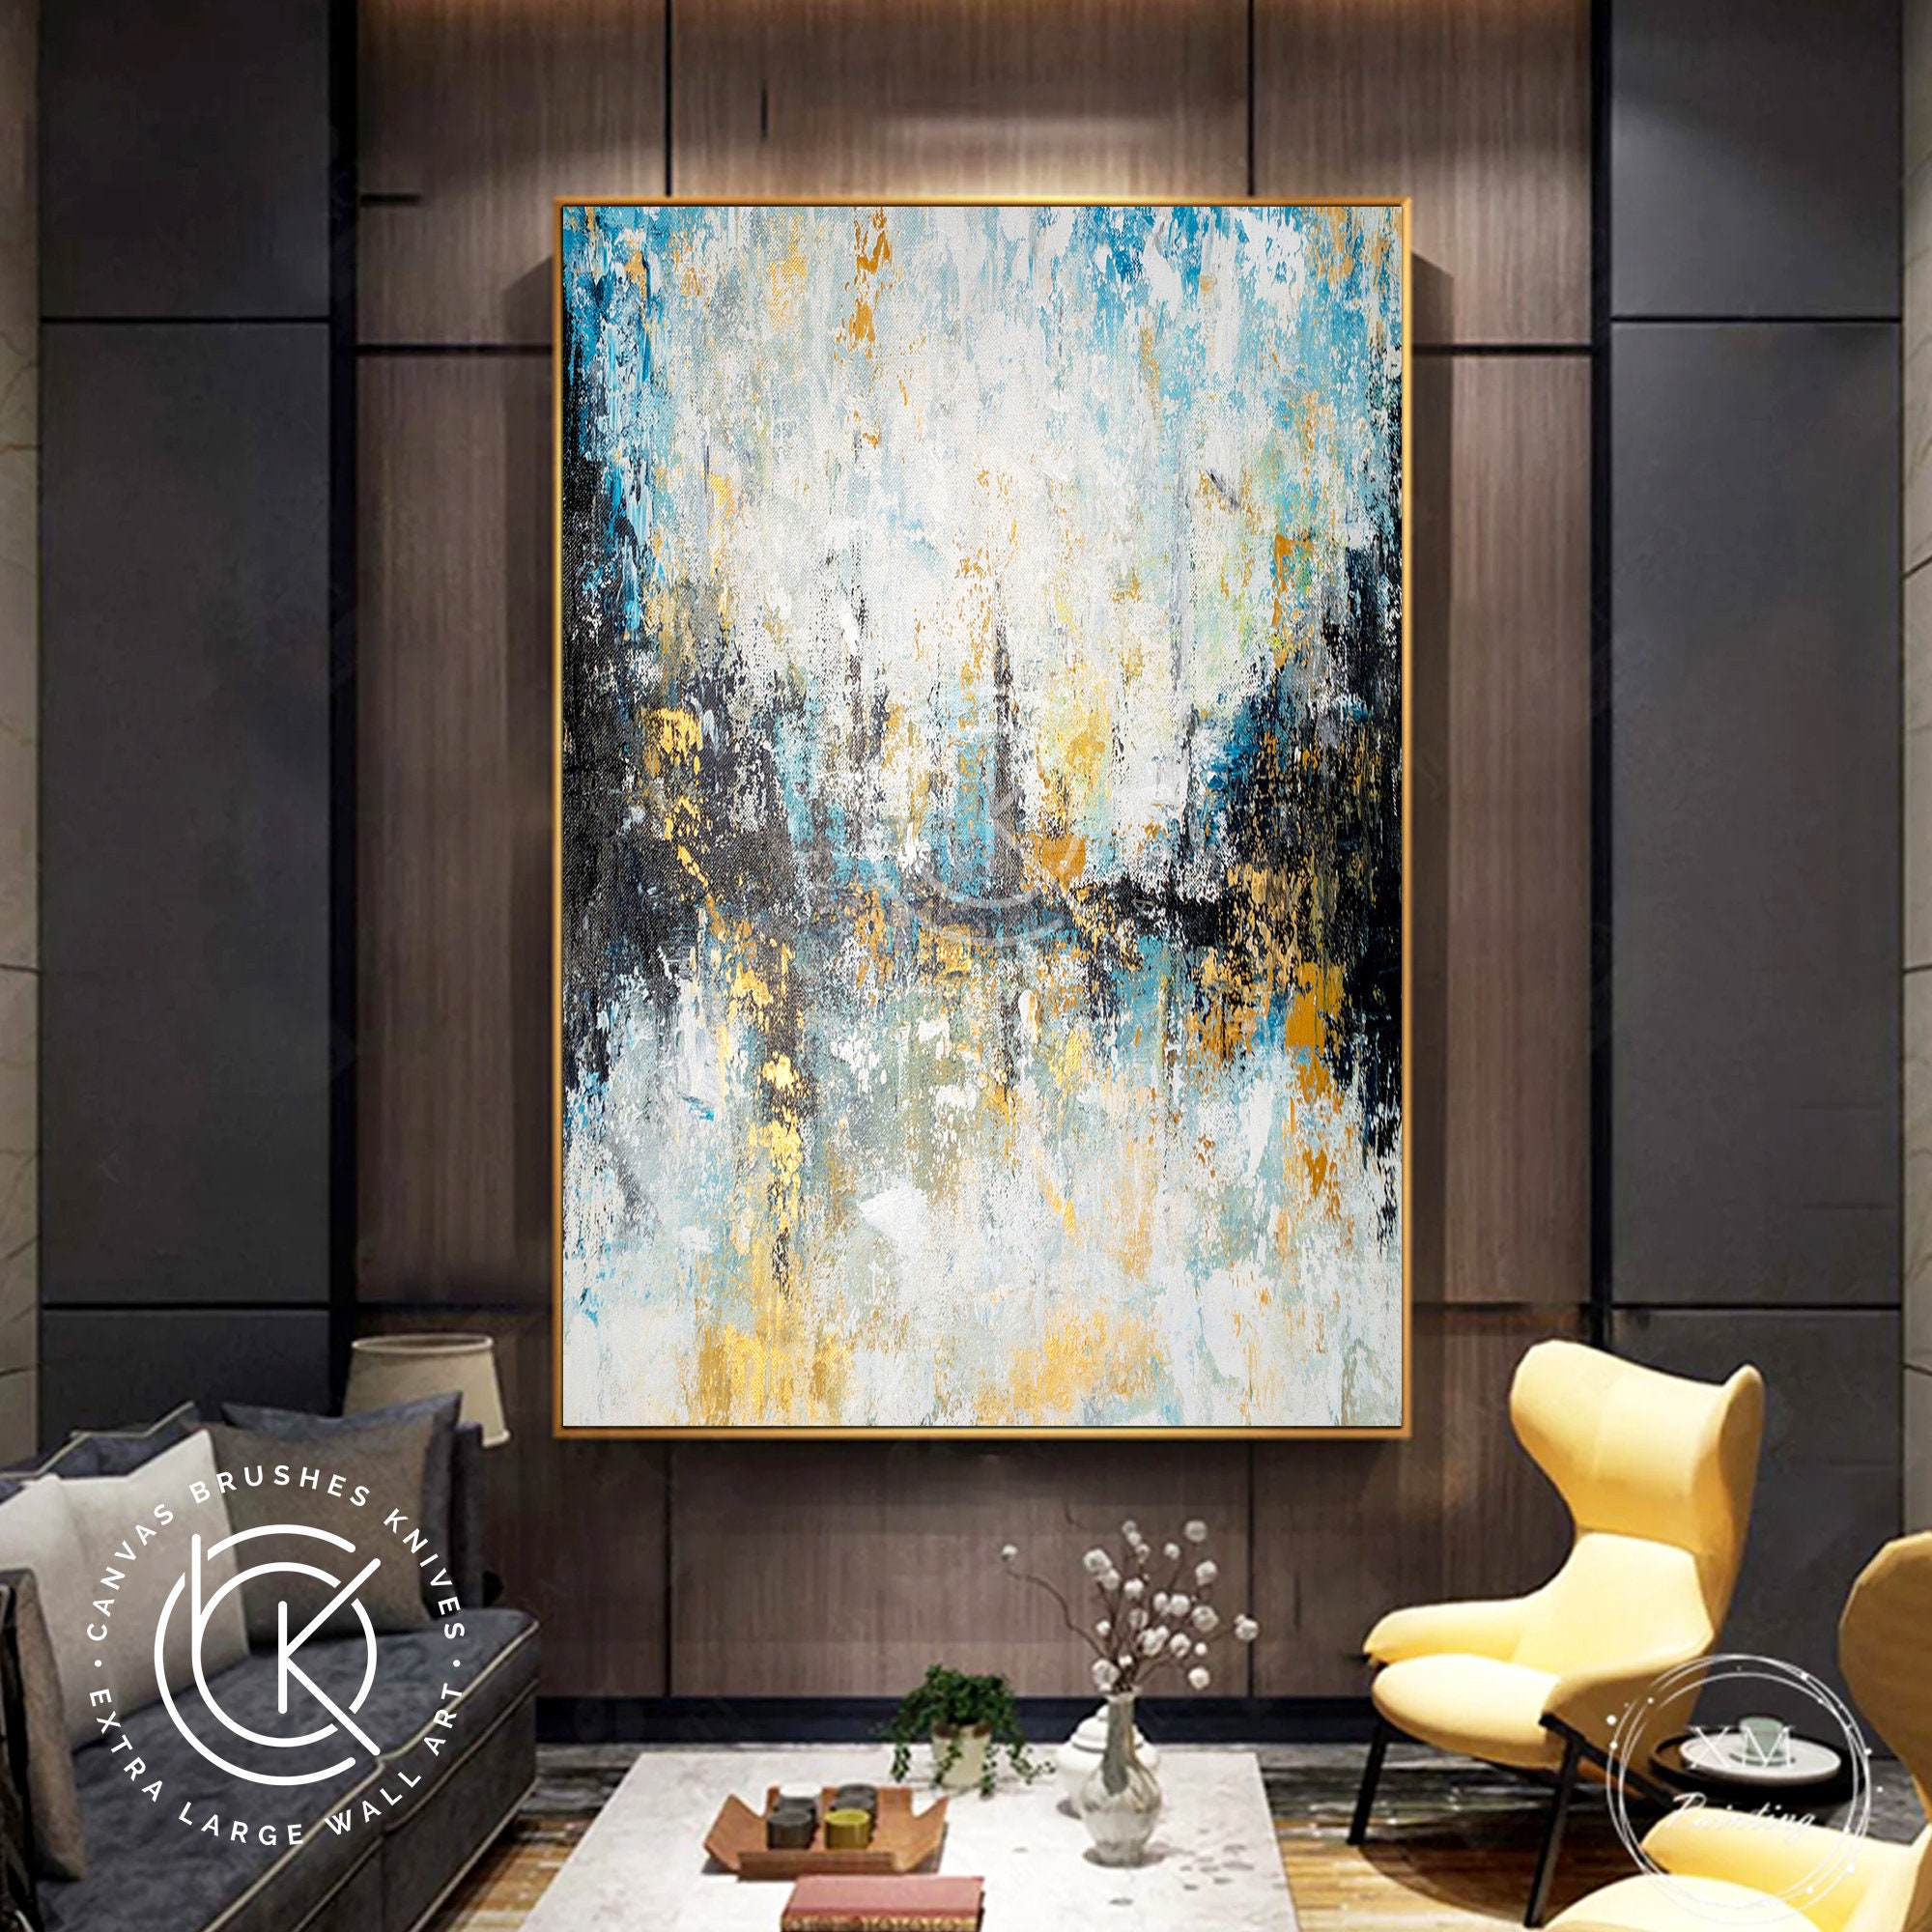 Large Abstract Painting On Canvas,Large Painting On Canvas,Painting Home  Decor,Canvas Large,Livingroom Decor